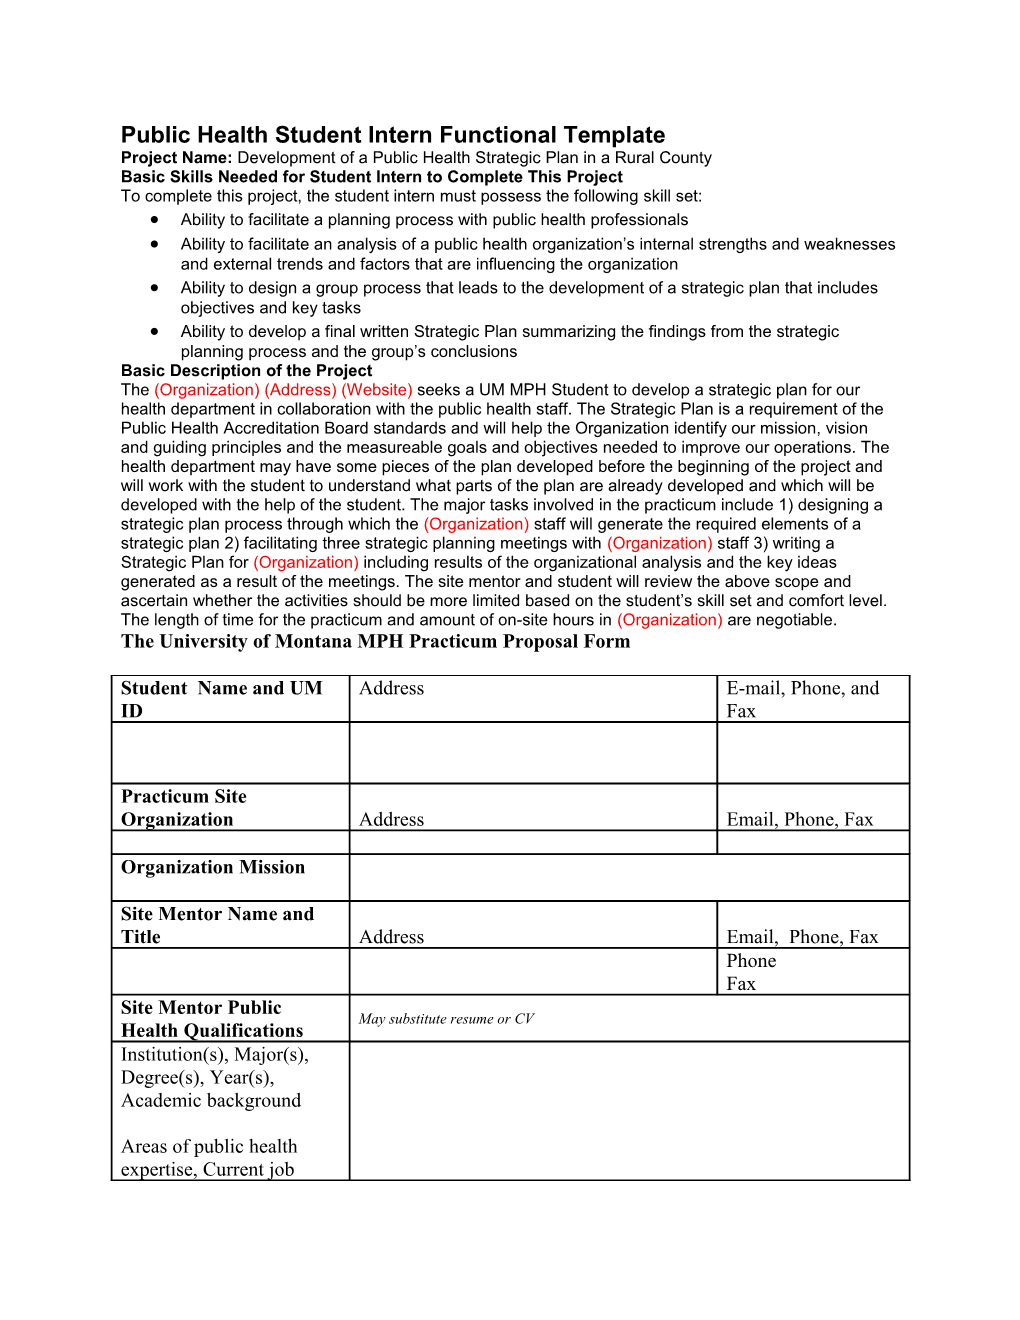 Public Health Student Intern Functional Template